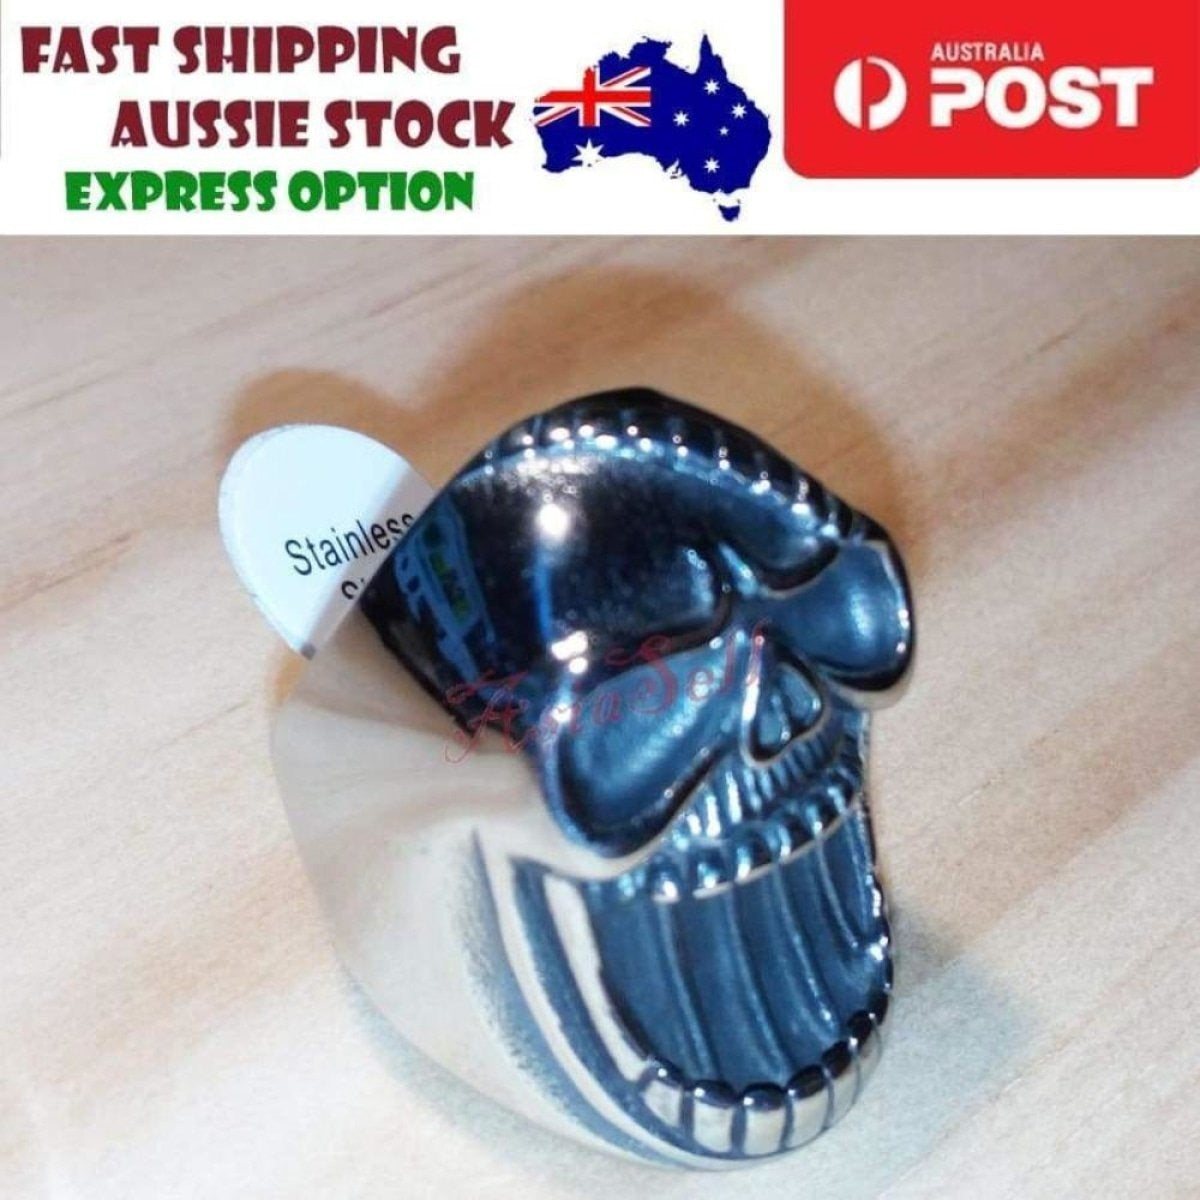 Stainless Steel Skull Ring Head Evil Ring Rings Black Silver Gold Silver Biker | Asia Sell  -  Type 6 Size 9 U.S. 60mm